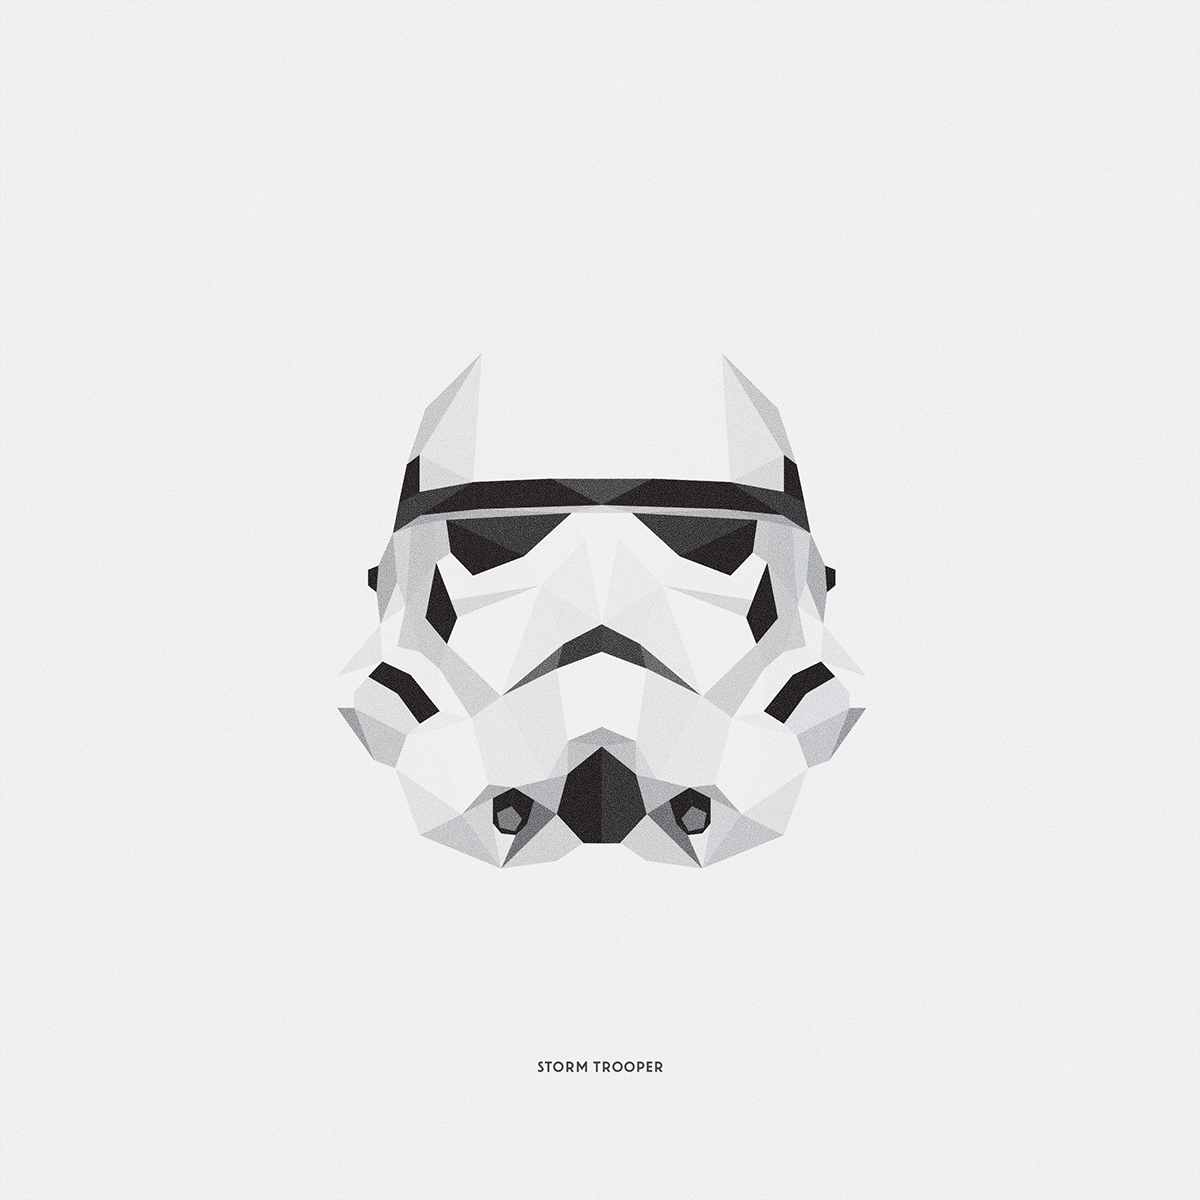 star wars geometric geometric design flat design darth vader storm trooper character illustration Low Poly c-3po imperial guard scout trooper Chewbacca Lucas Films